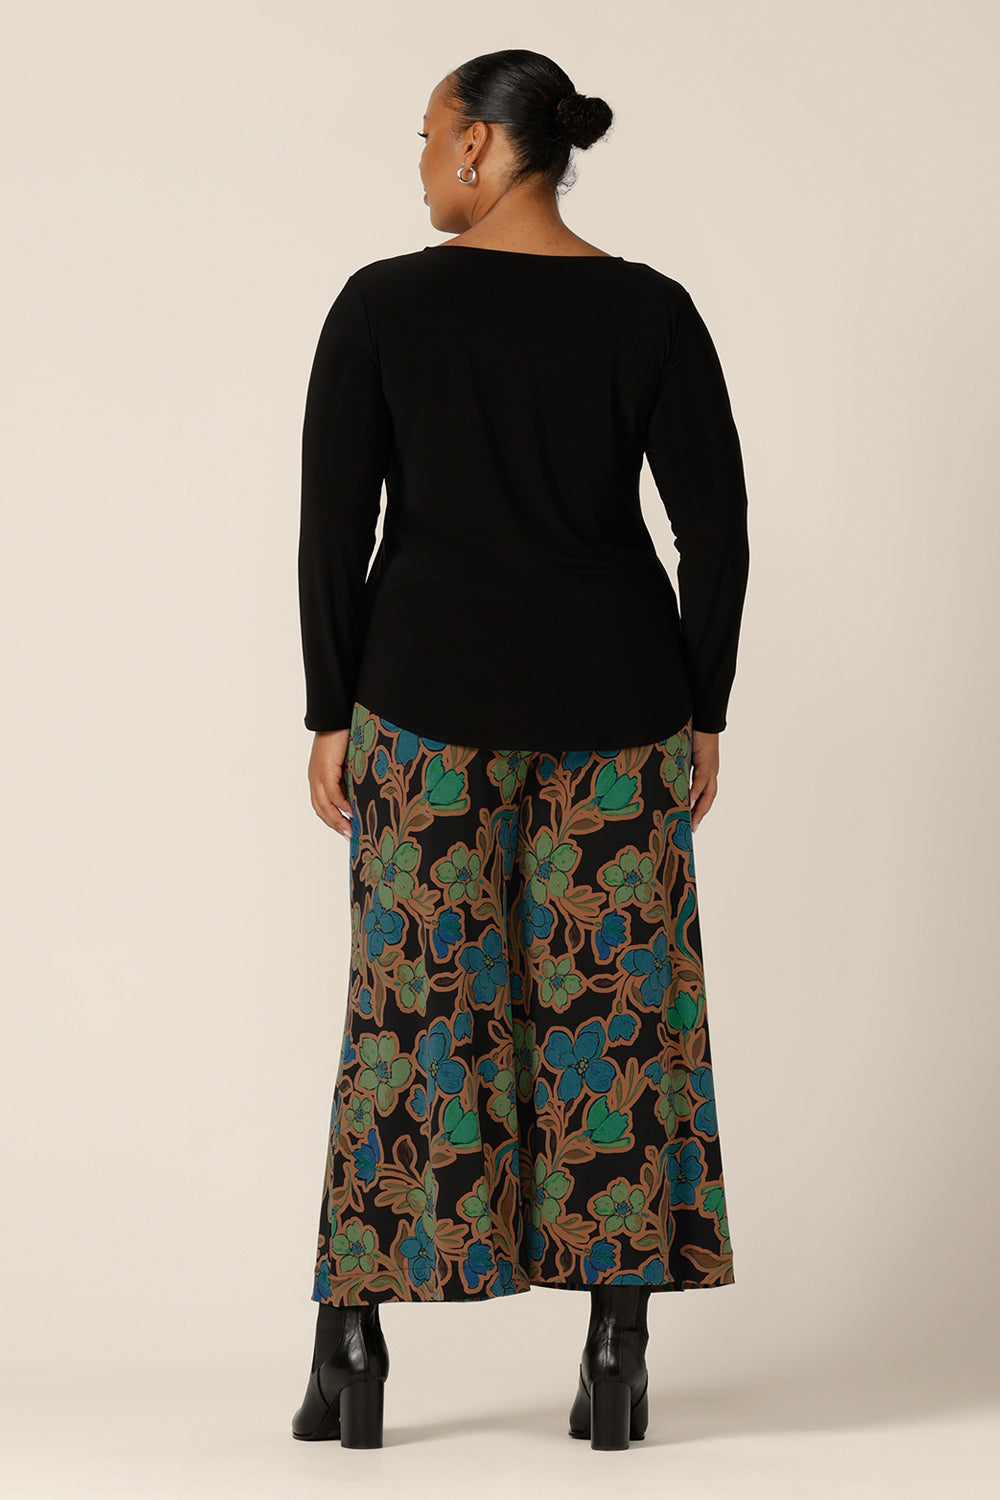 Back view of the Presley Pants in Secret Garden - a mid-rise, pull-on pant with wide legs and stretch jersey fabrication, worn with a long sleeve black top. Made in Australia by women's clothing brand L&F. Shop trousers in sizes 8 to 24 now.